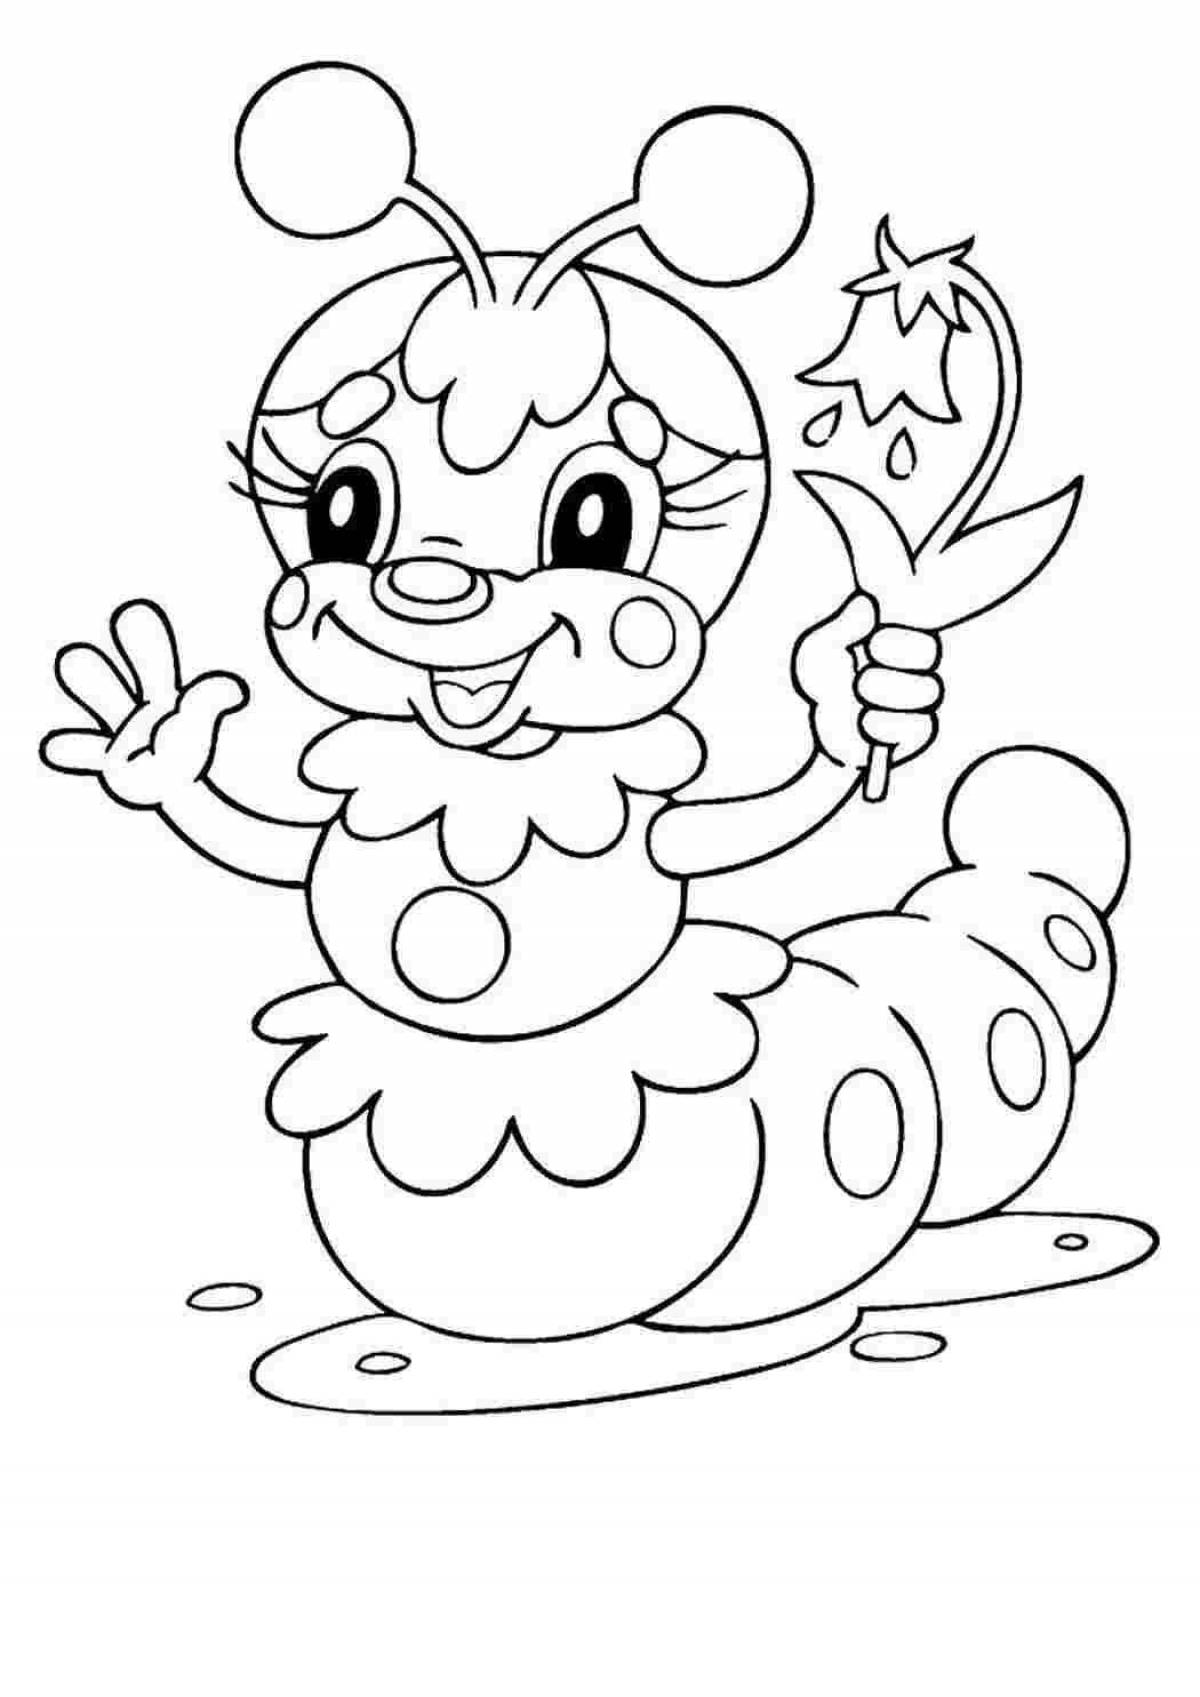 Fantastic animal coloring pages